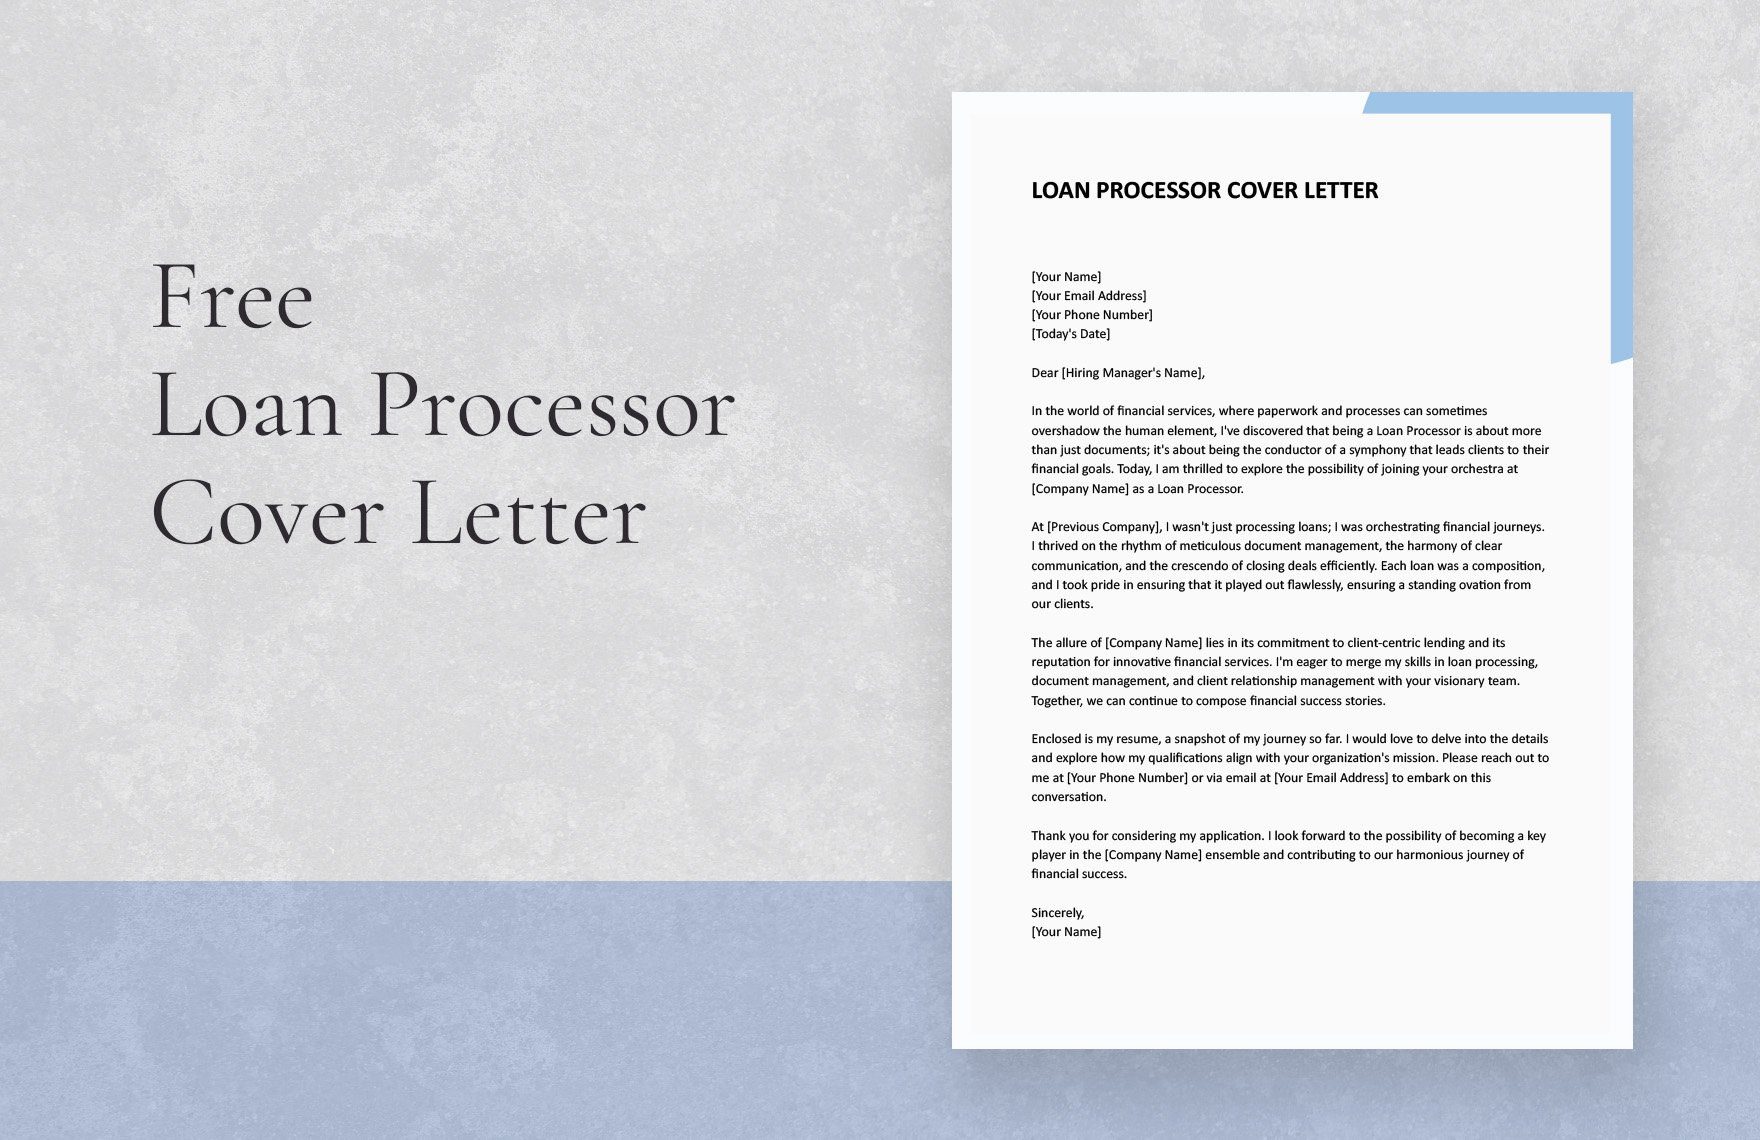 Loan Processor Cover Letter in Word, Google Docs